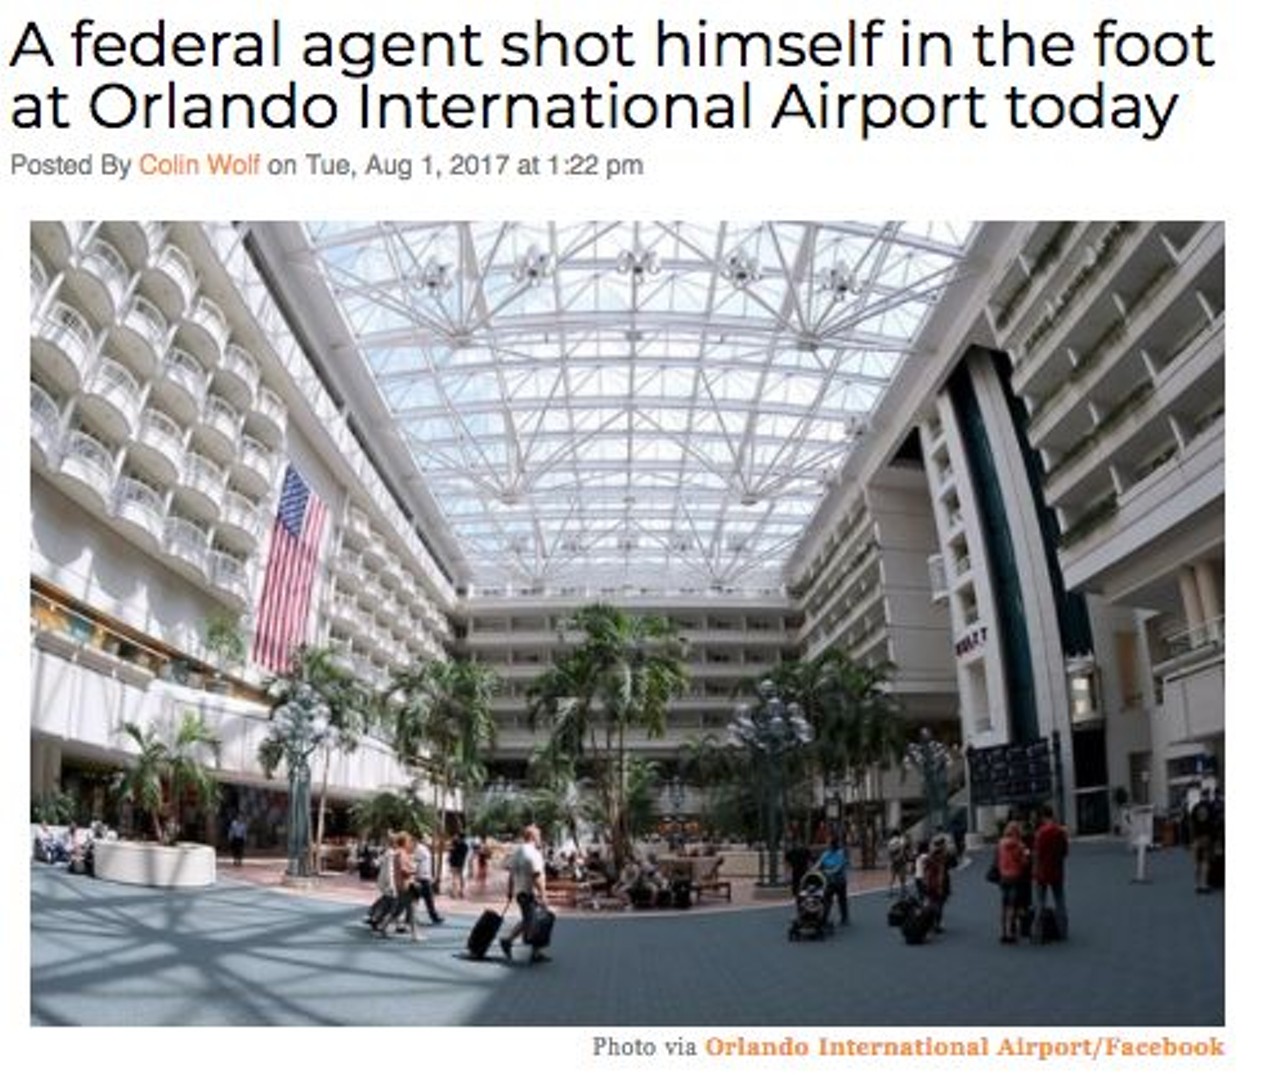 While wearing an American flag T-shirt with the phrase "PROUD" across it, a federal agent in plain clothes dropped his gun and shot himself in the foot in the Orlando International Airport.  Read more